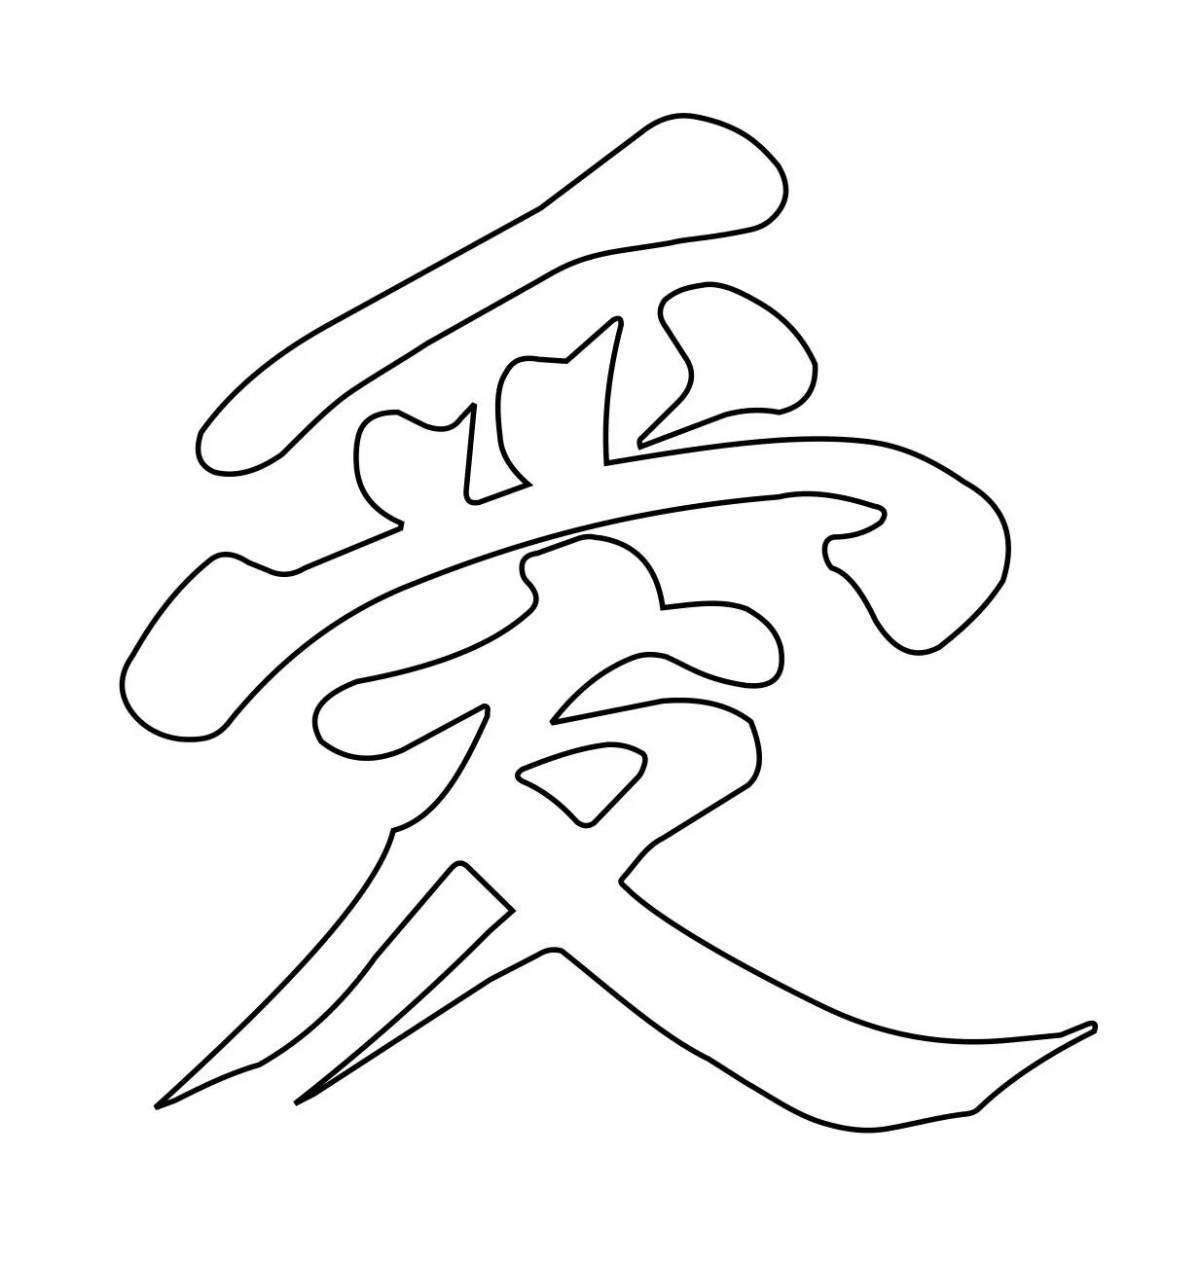 Chinese character coloring page fun